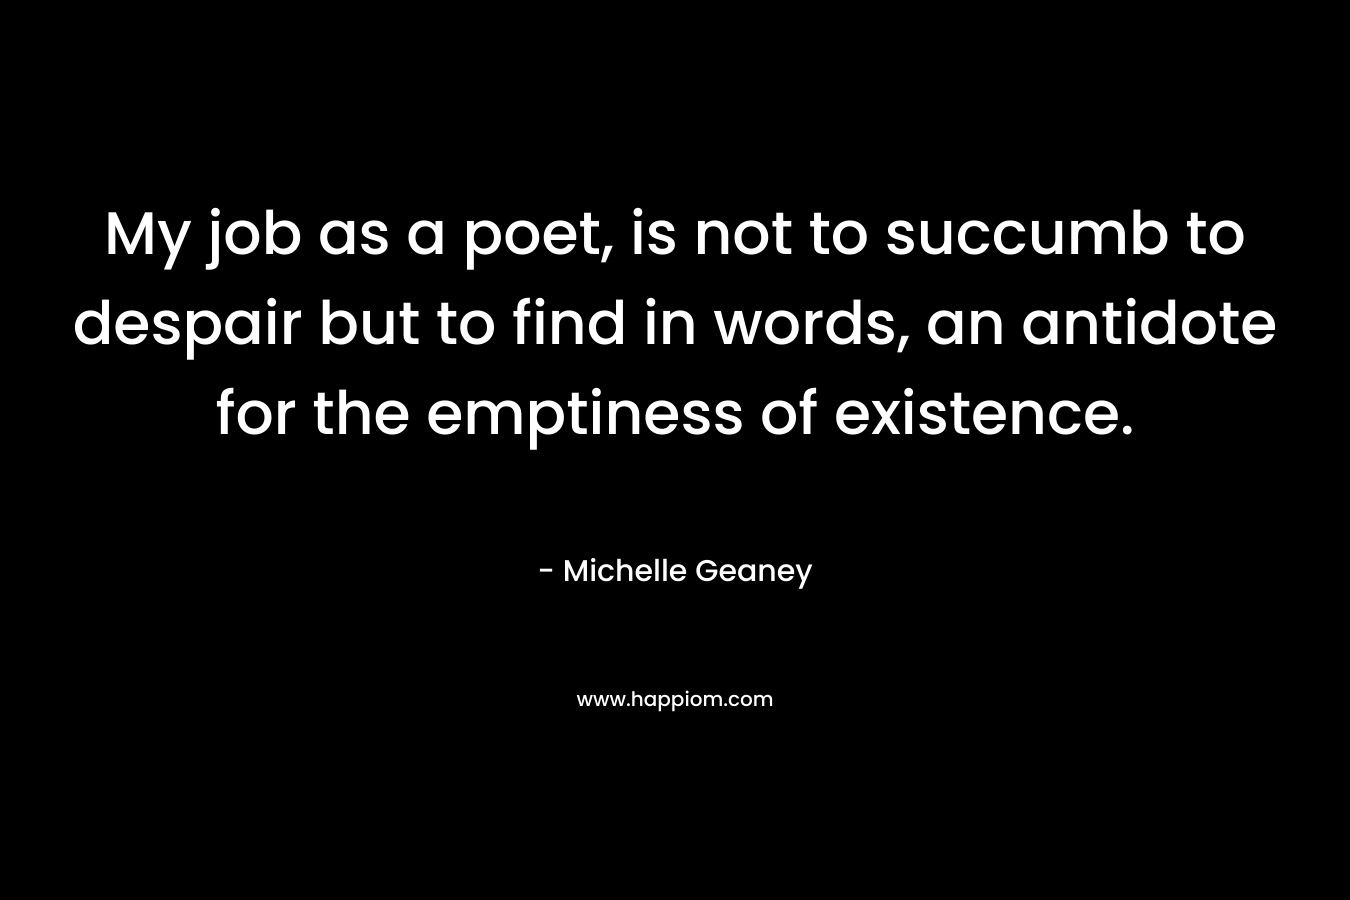 My job as a poet, is not to succumb to despair but to find in words, an antidote for the emptiness of existence.